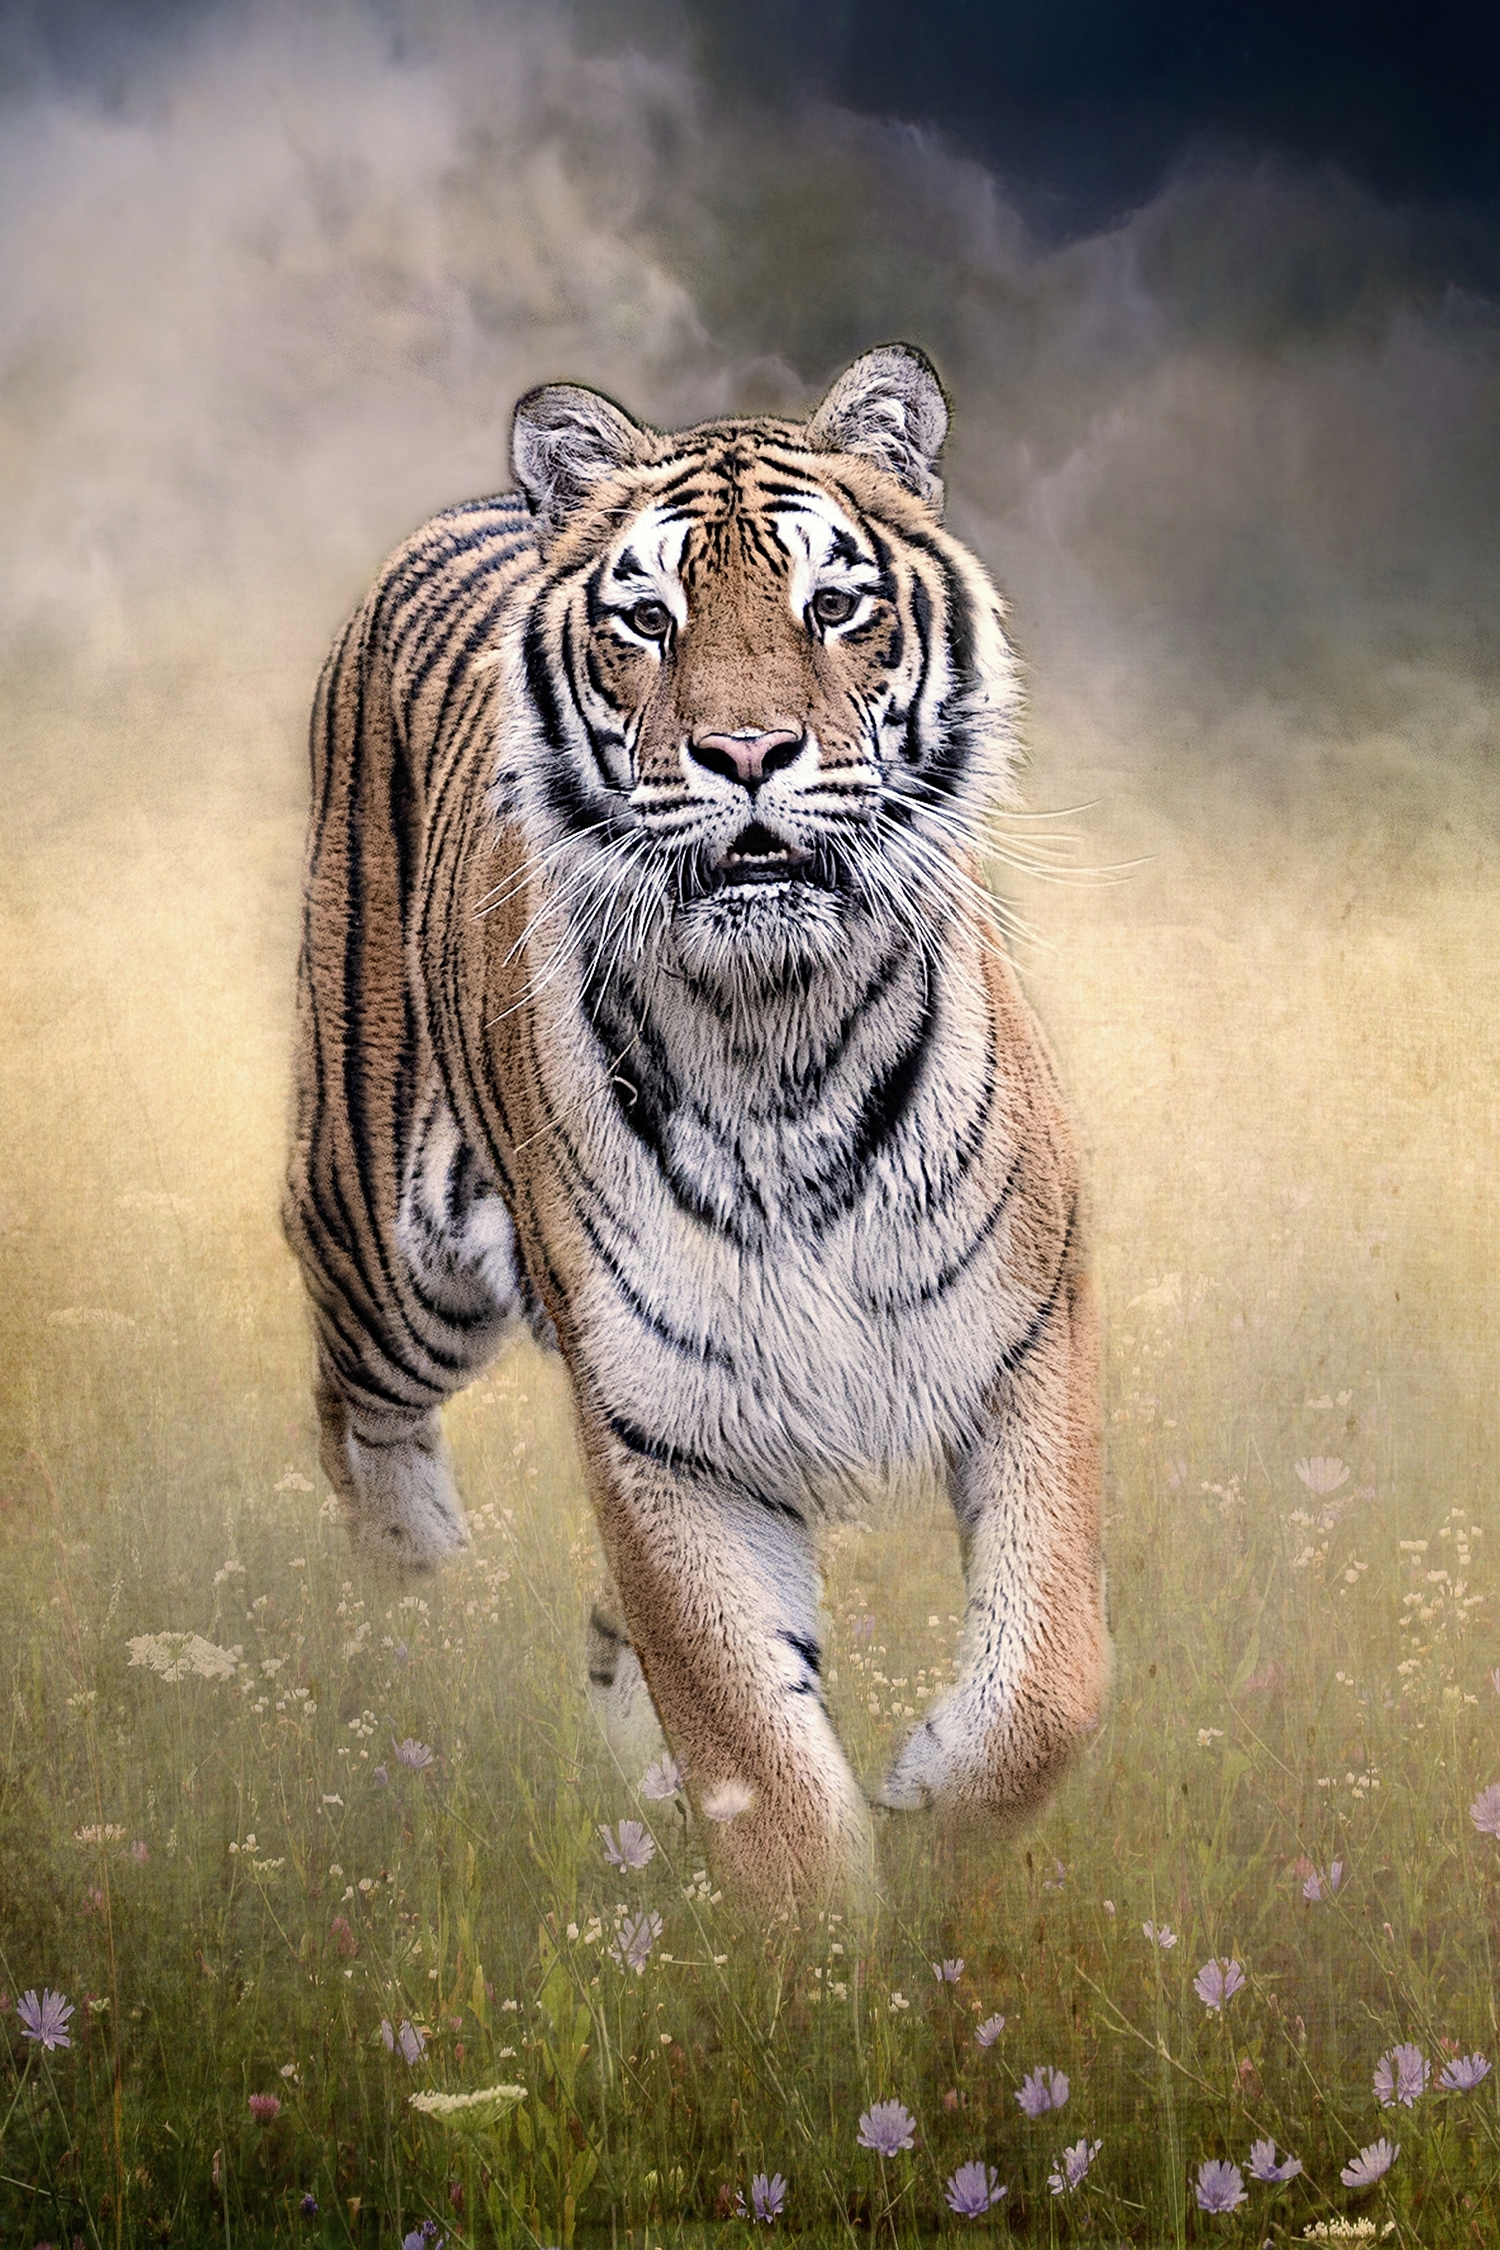 Tiger in a Field of Wildflowers